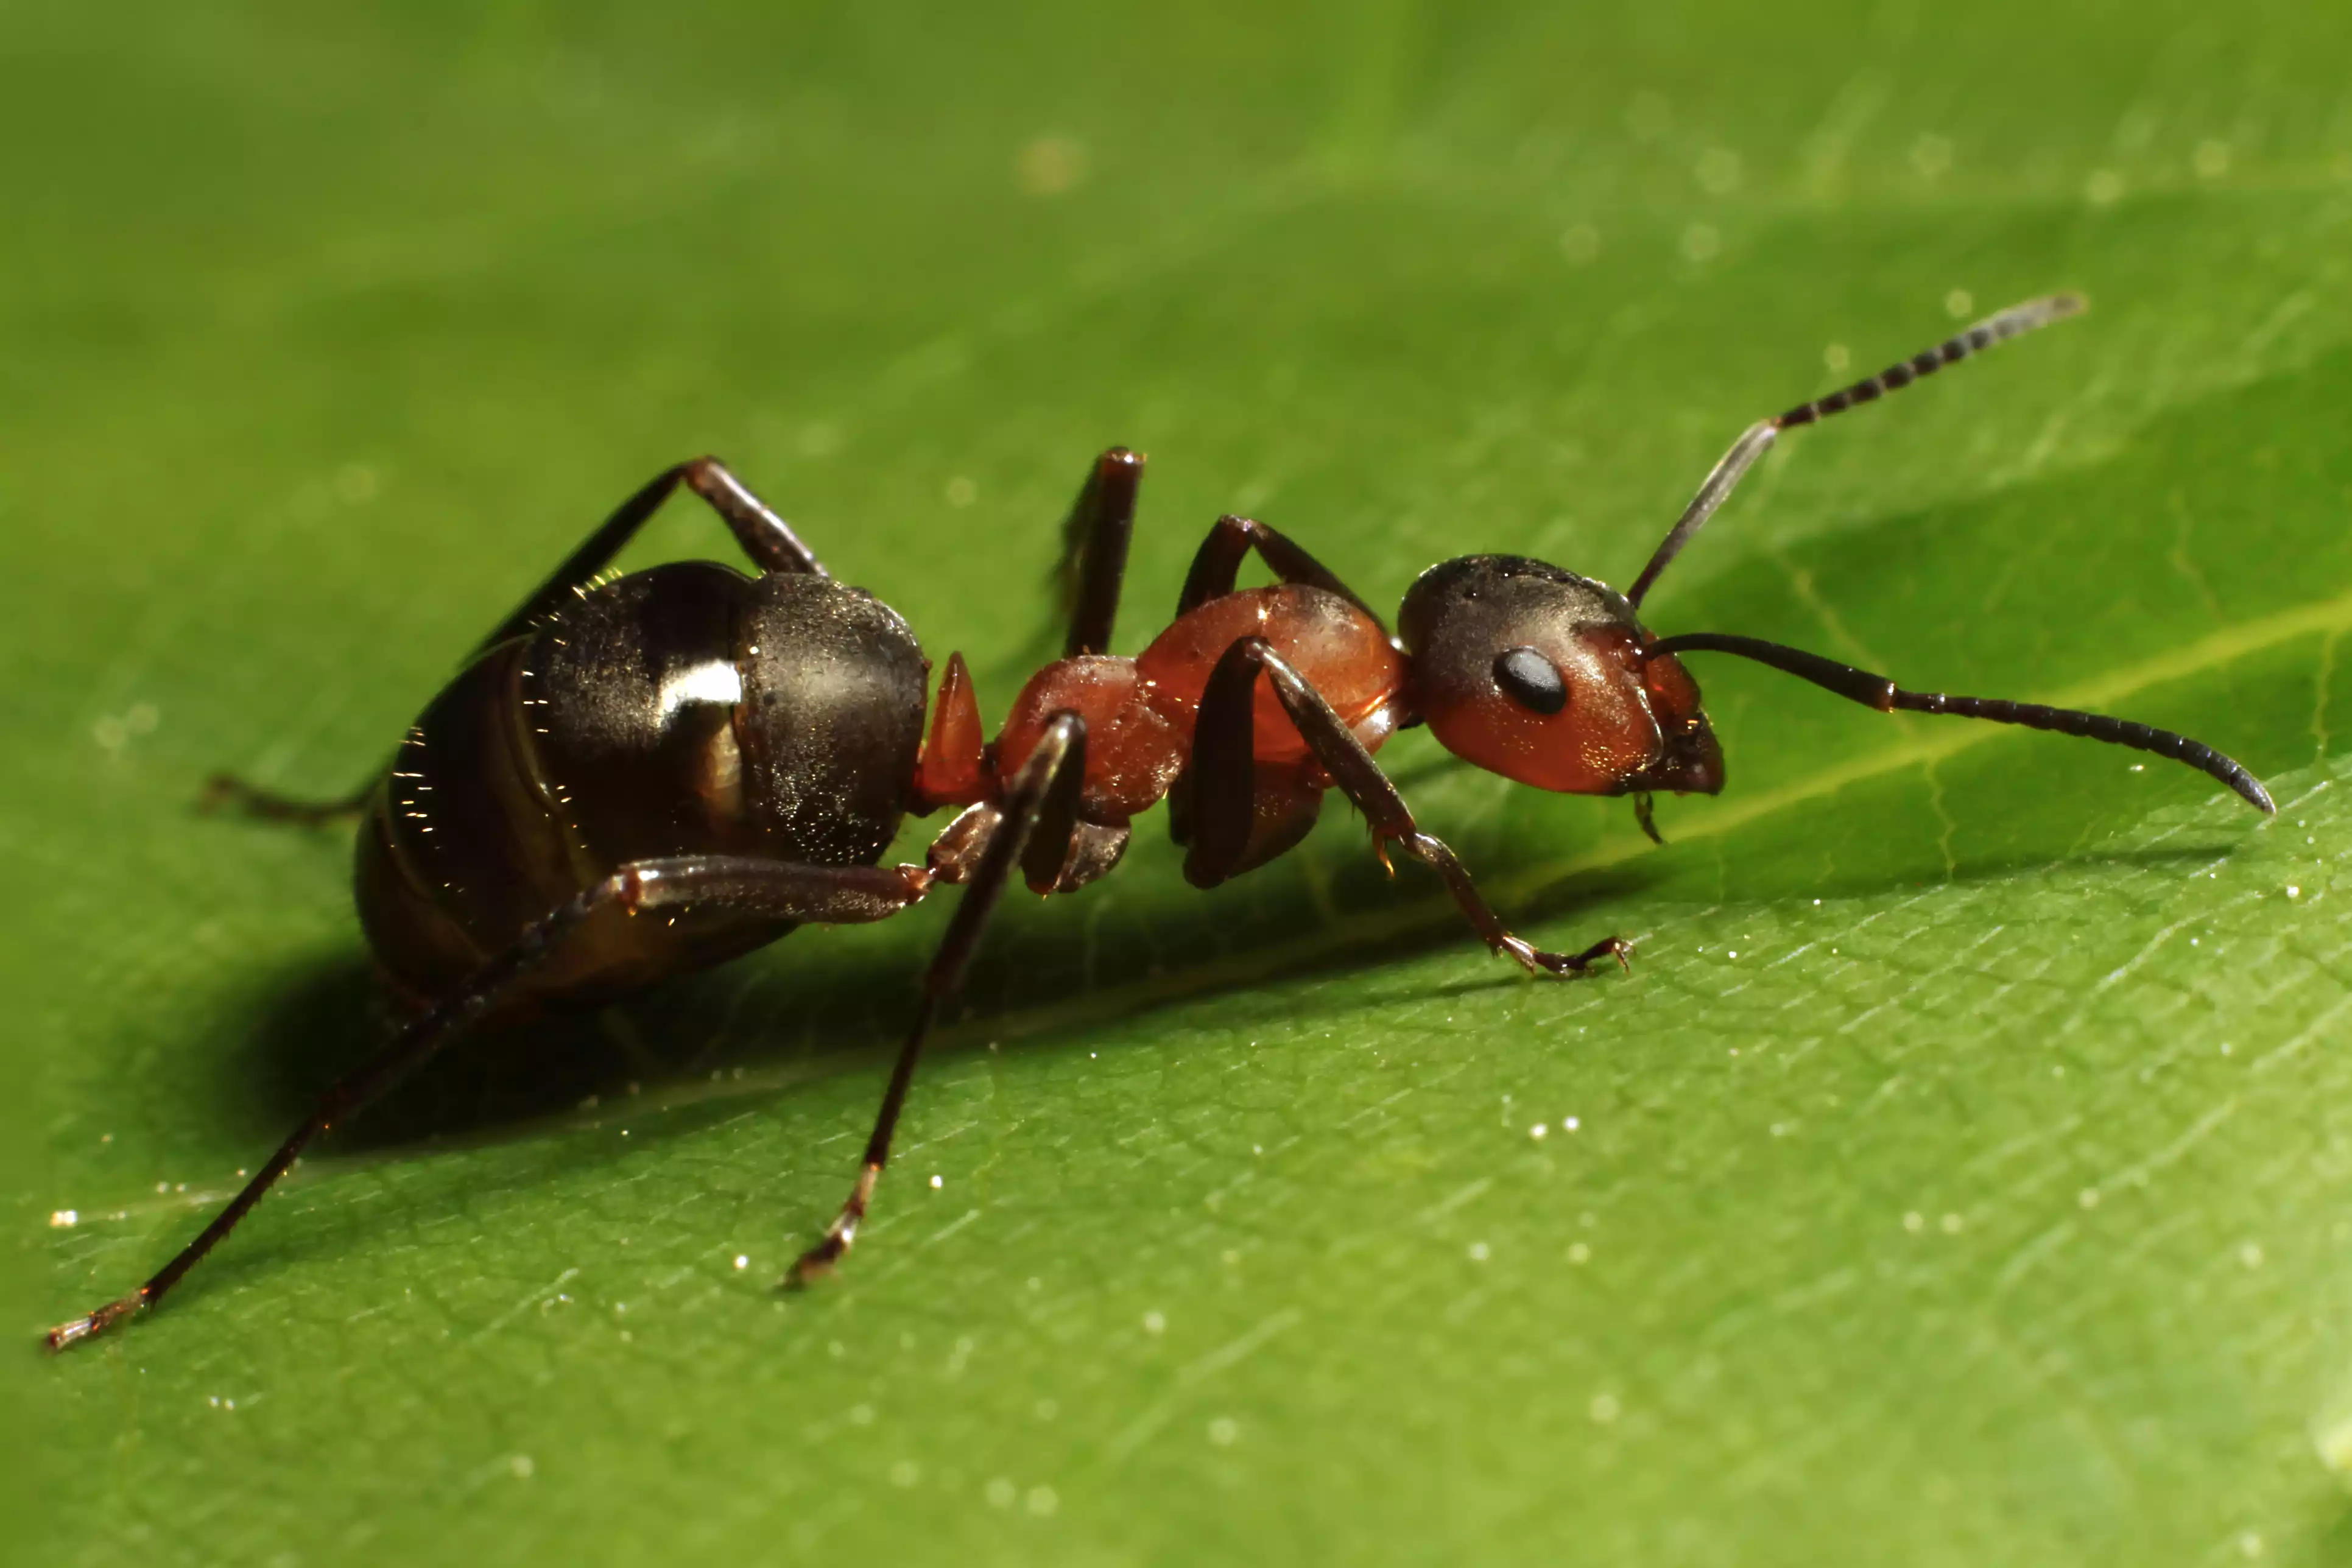 An ant with a red head and black abdomen sitting on a green leaf